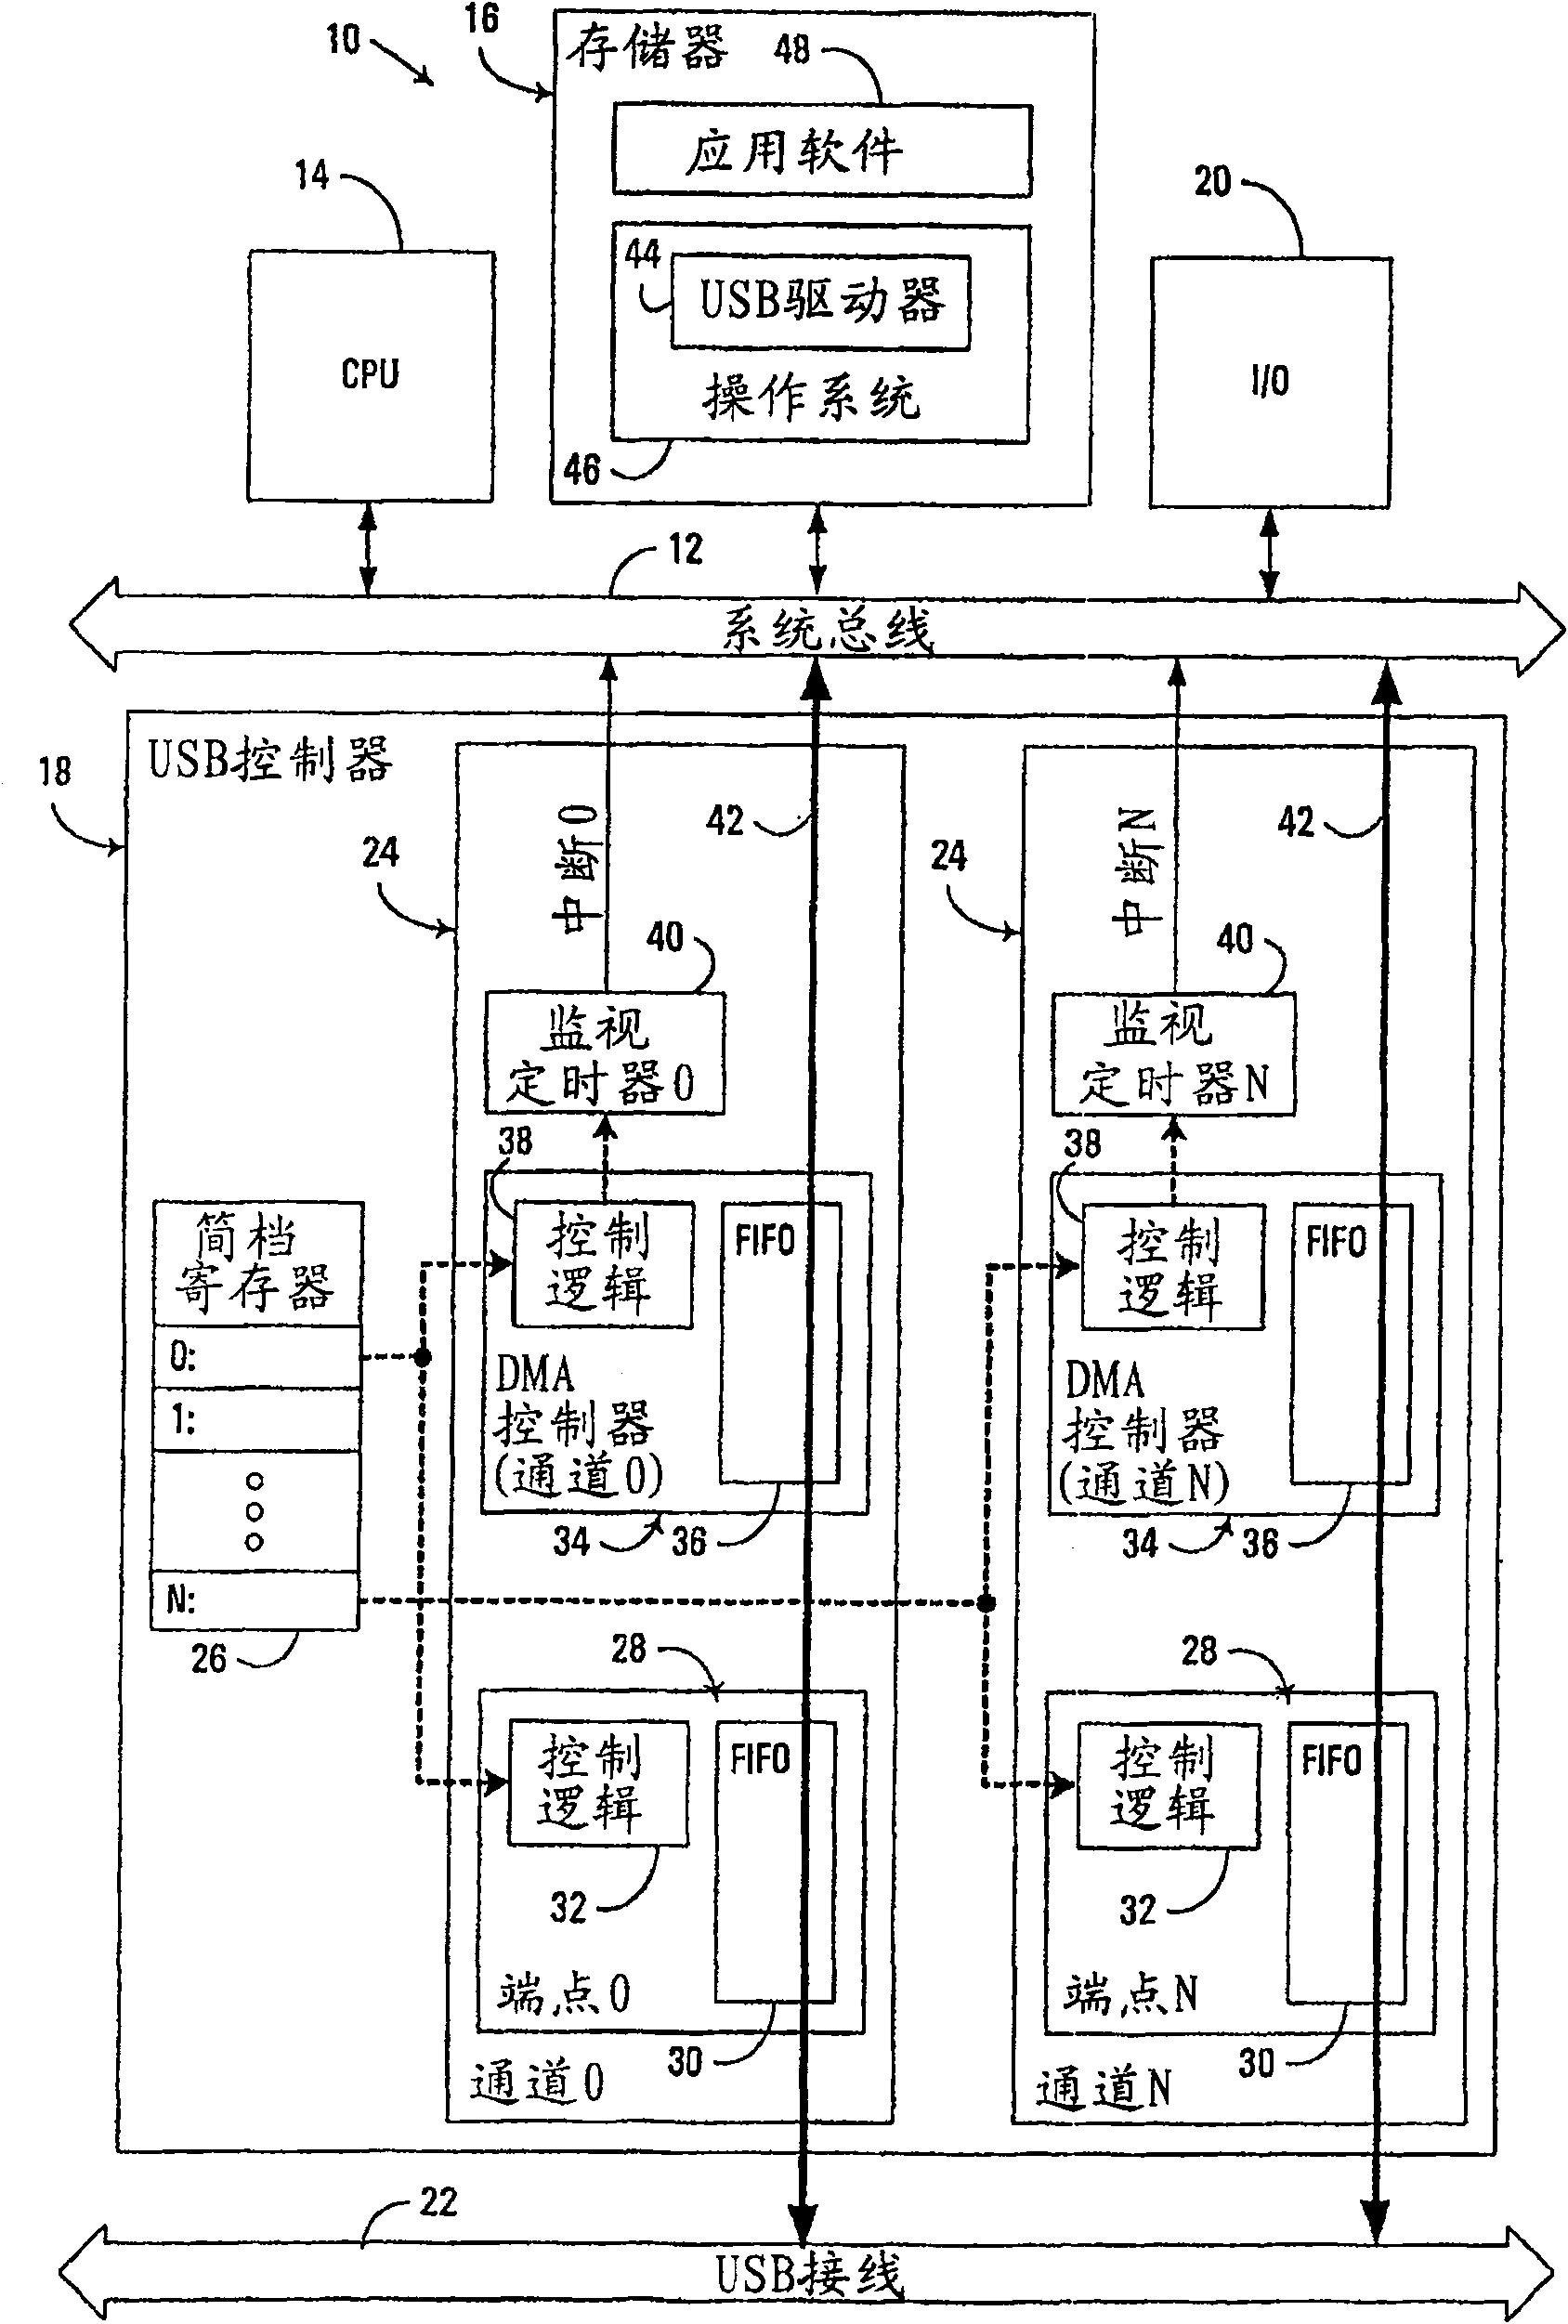 Circuit structure and method for transmitting data in DMA passage by DMA control circuit